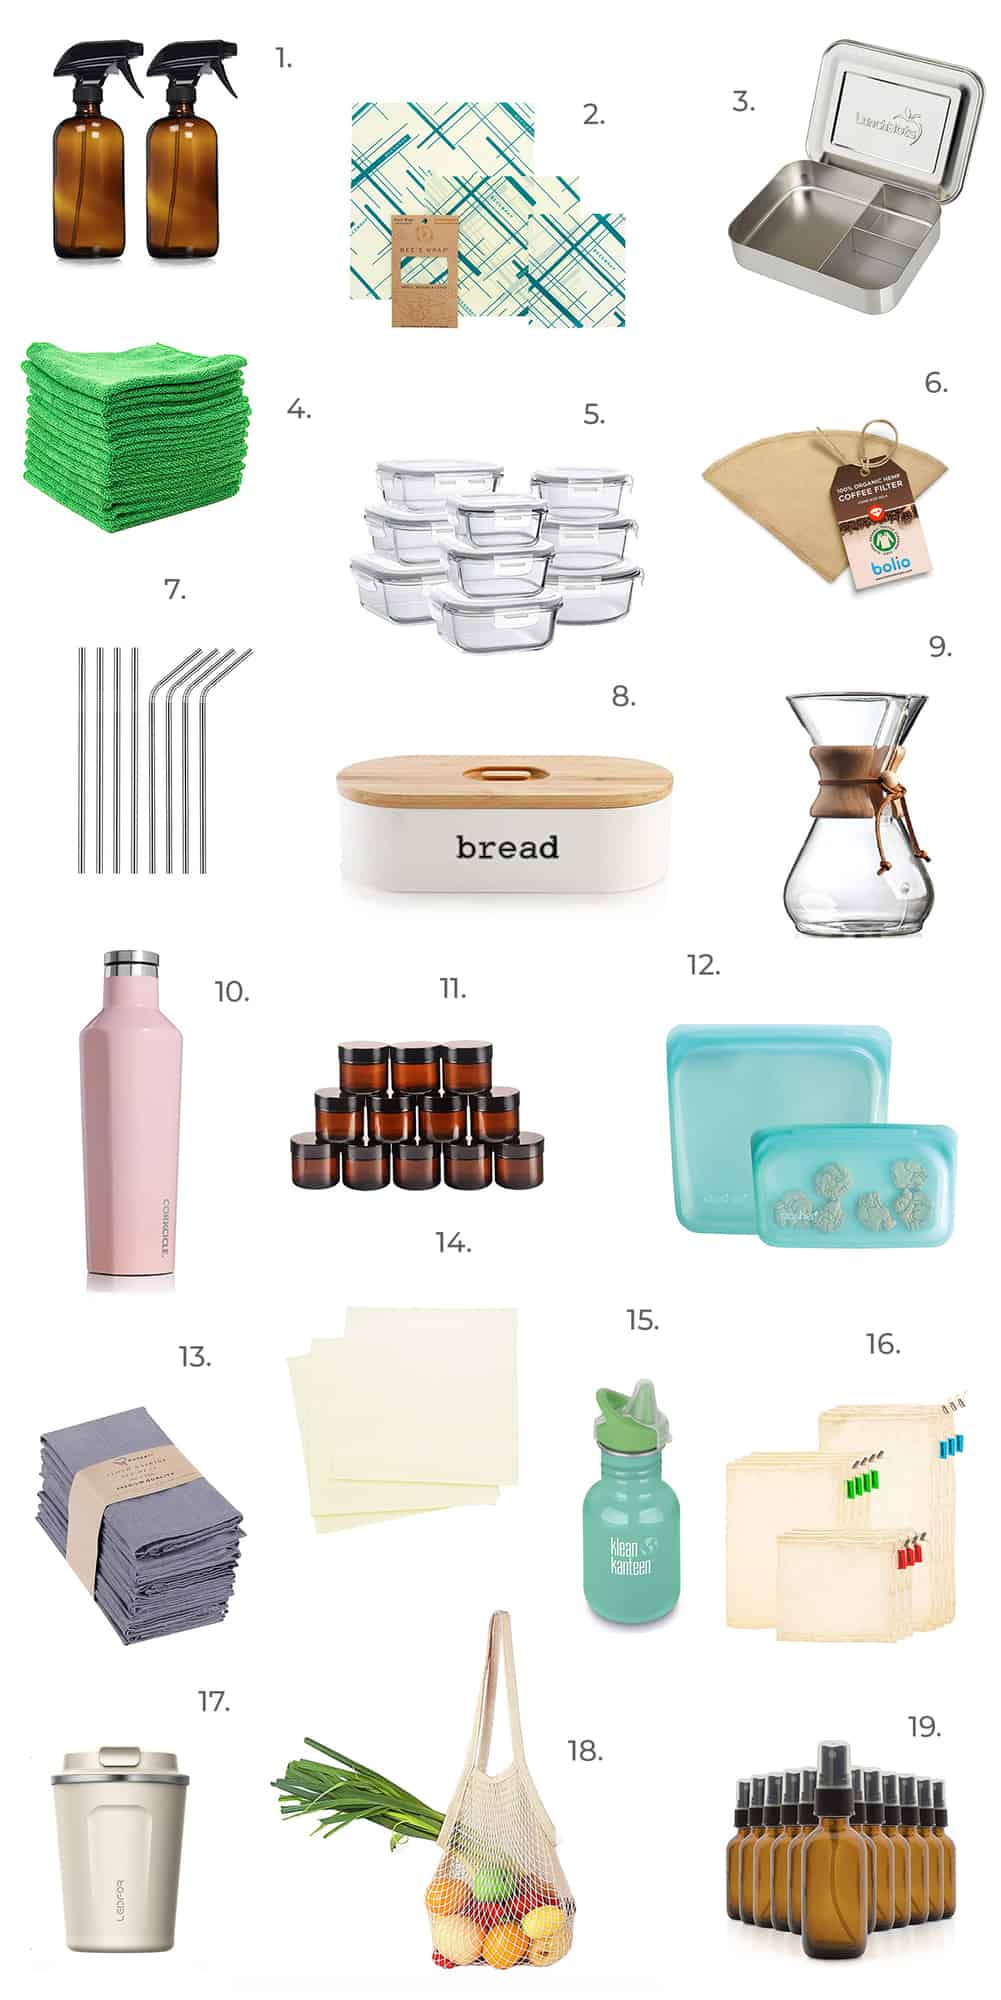 https://abeautifulmess.com/wp-content/uploads/2019/02/The-Best-Reusable-Items-On-Amazon-click-through-for-links-1-1.jpg